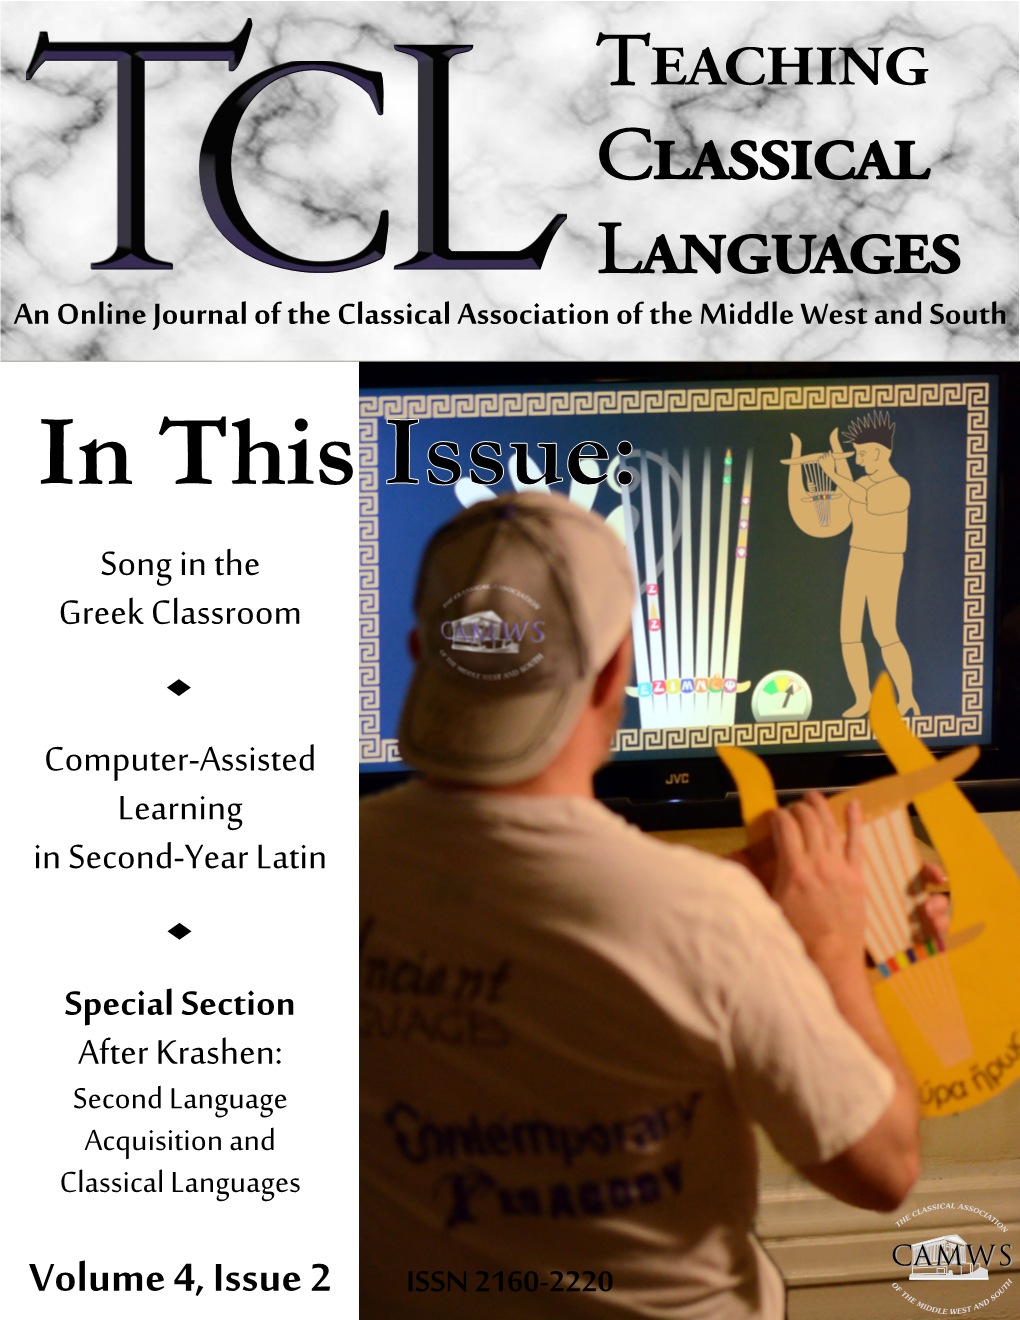 In This Issue: Song in the Greek Classroom